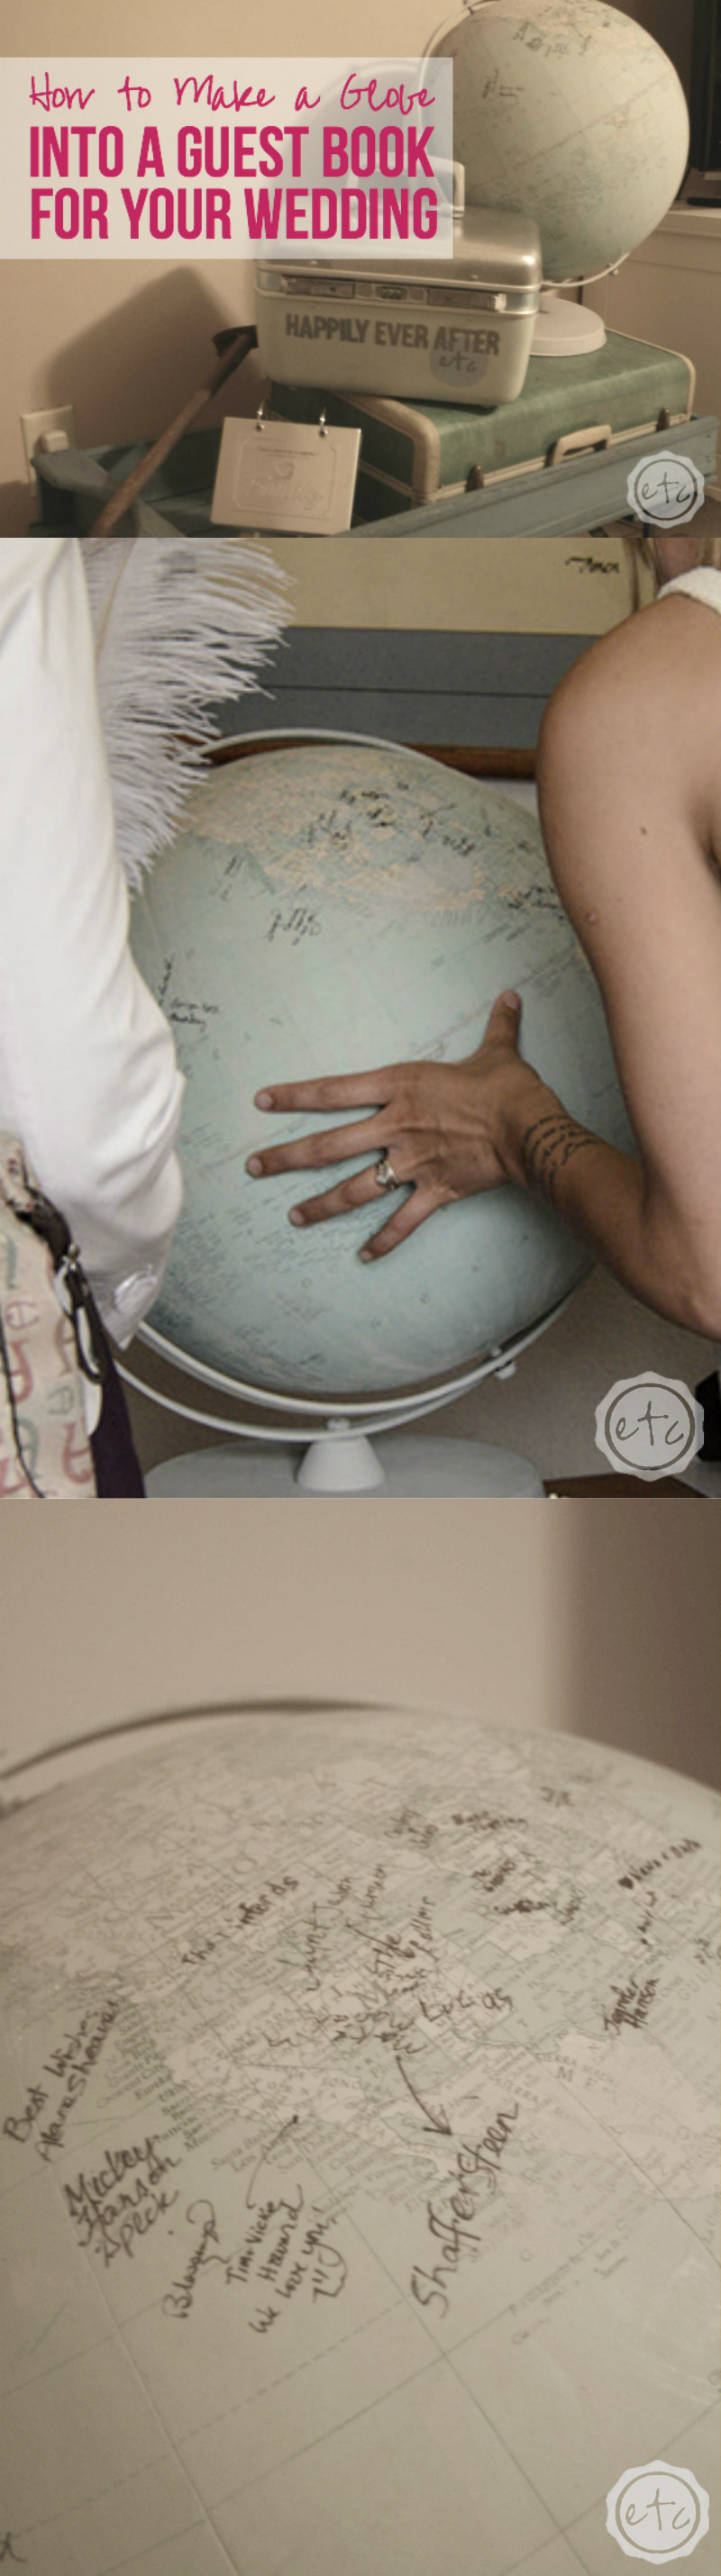 How to Turn a Globe into a Guest Book for your Wedding with Happily Ever After, Etc.